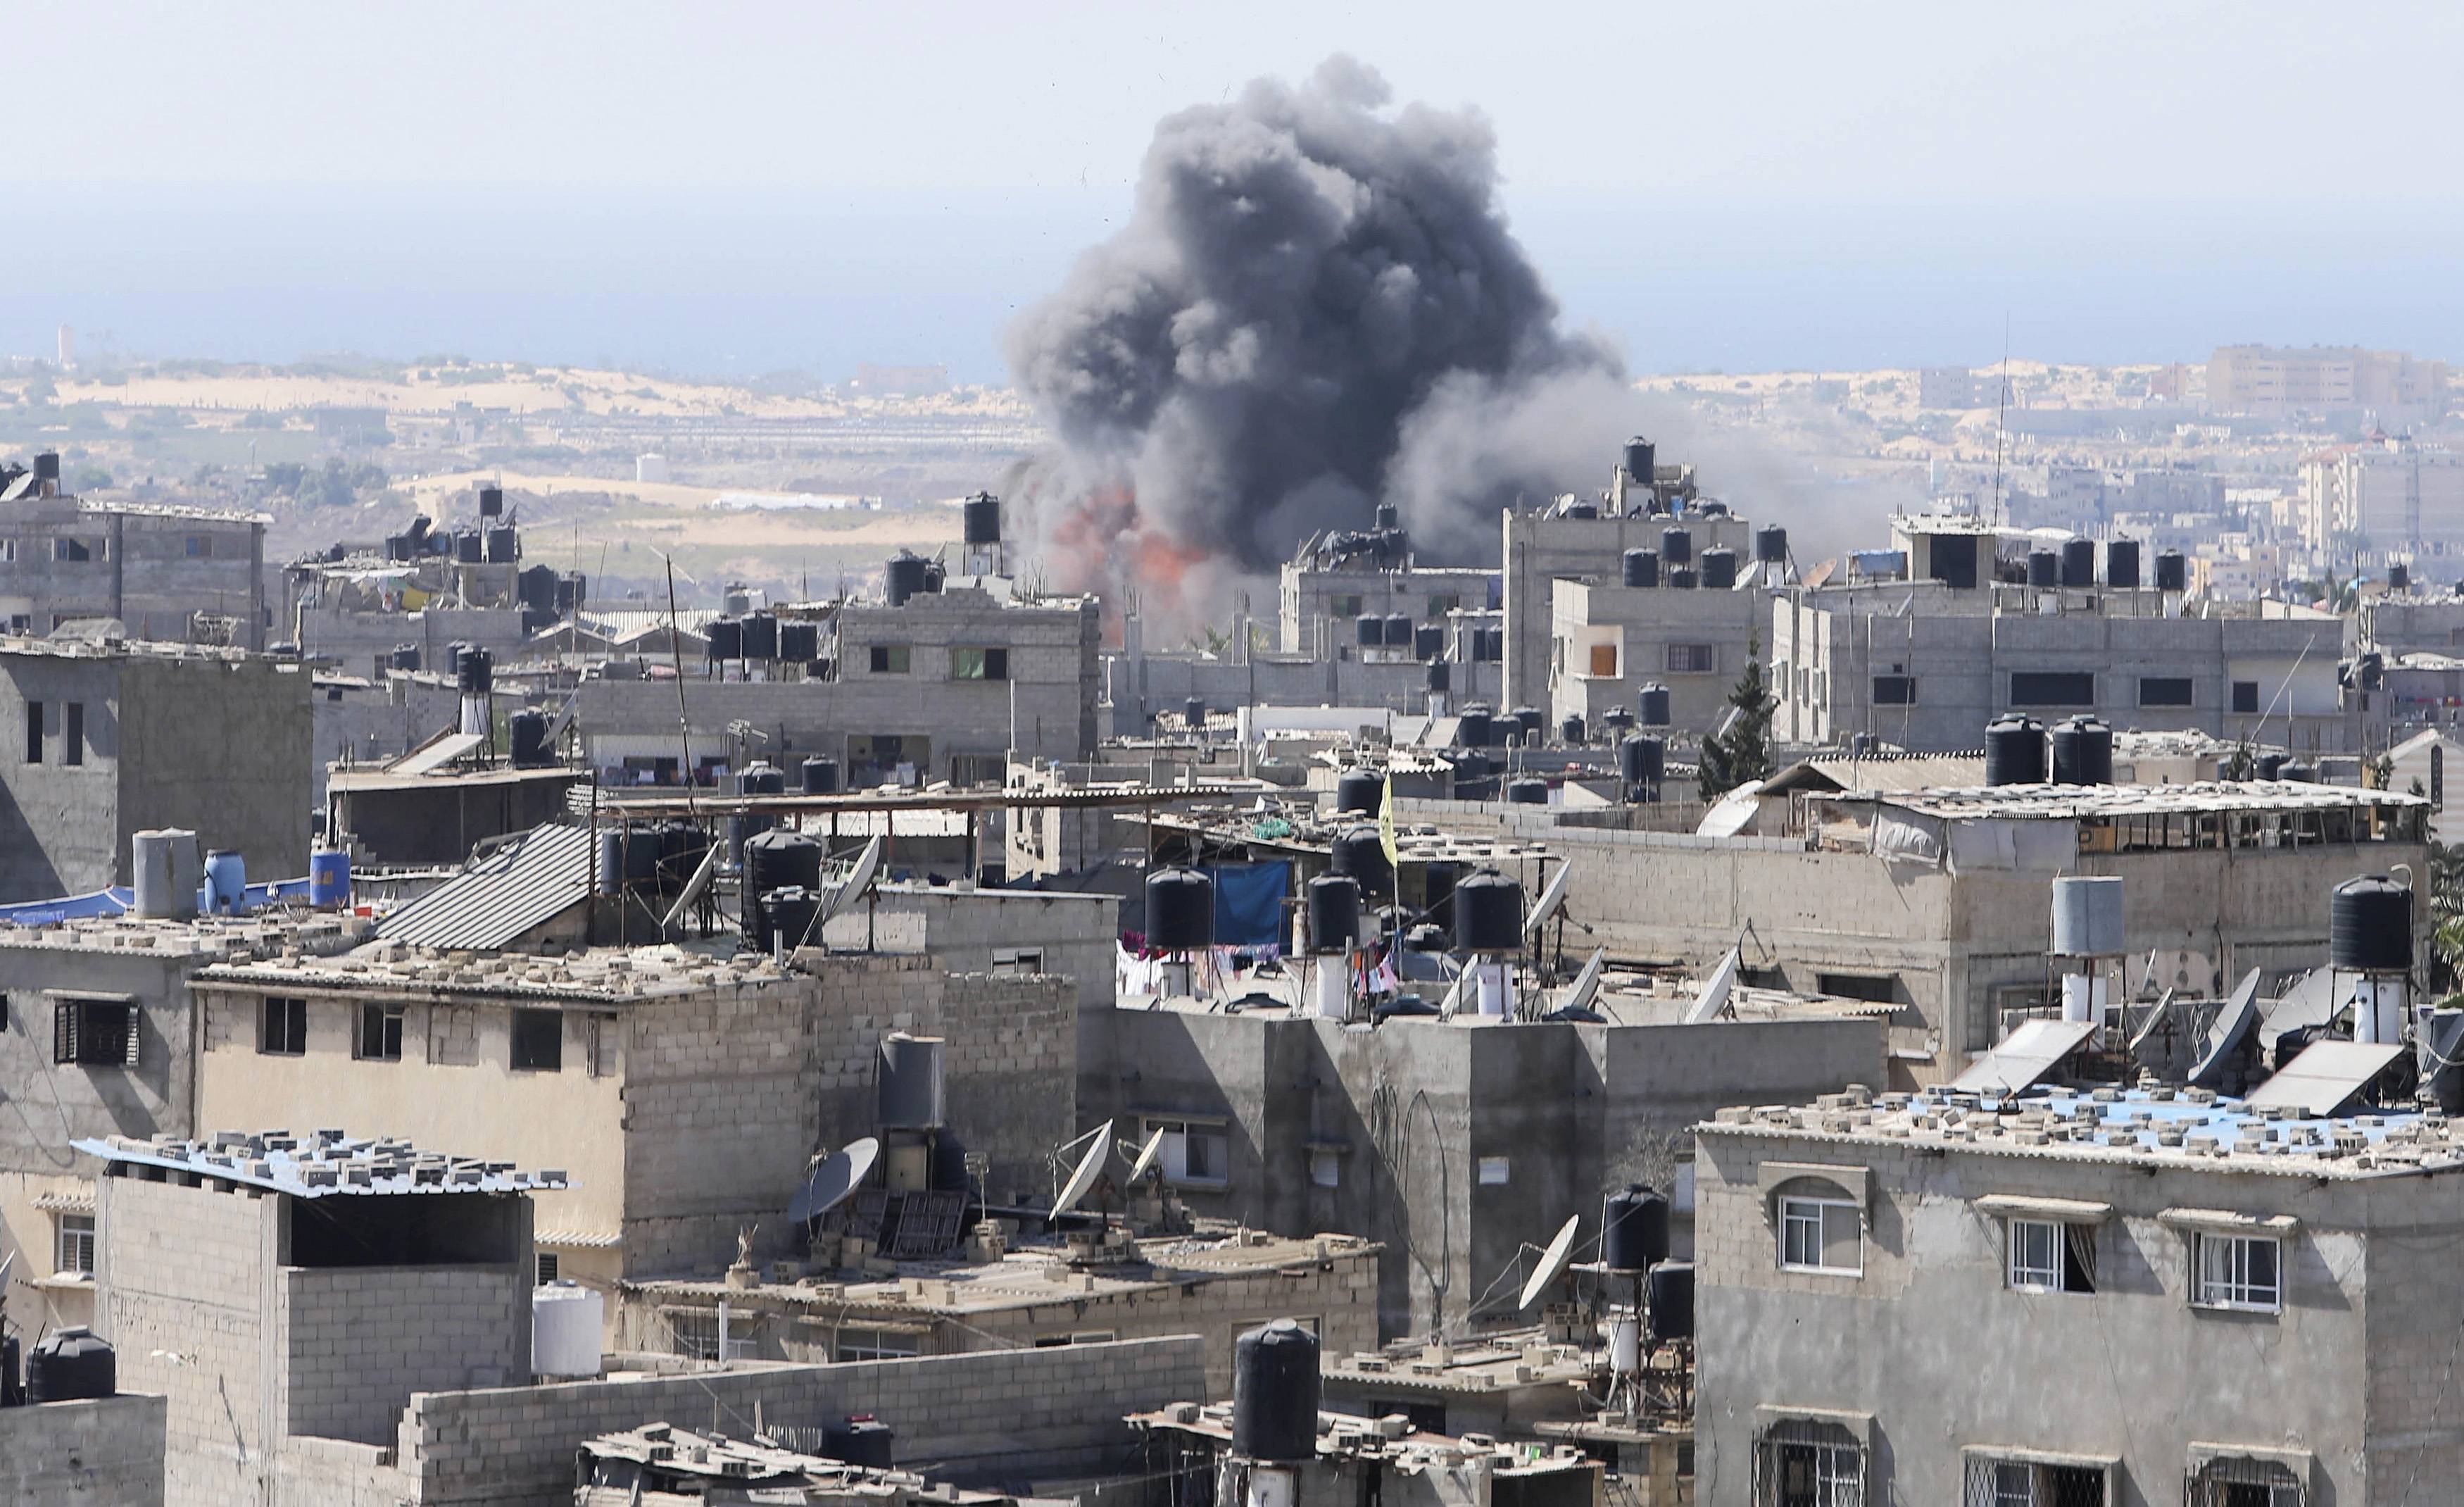 Smoke and flames are seen following what Palestinian witnesses said was an Israeli air strike in Rafah in the southern Gaza Strip July 10, 2014. At least 74 Palestinians, most of them civilians, have been killed in Israel's Gaza offensive, Palestinian off